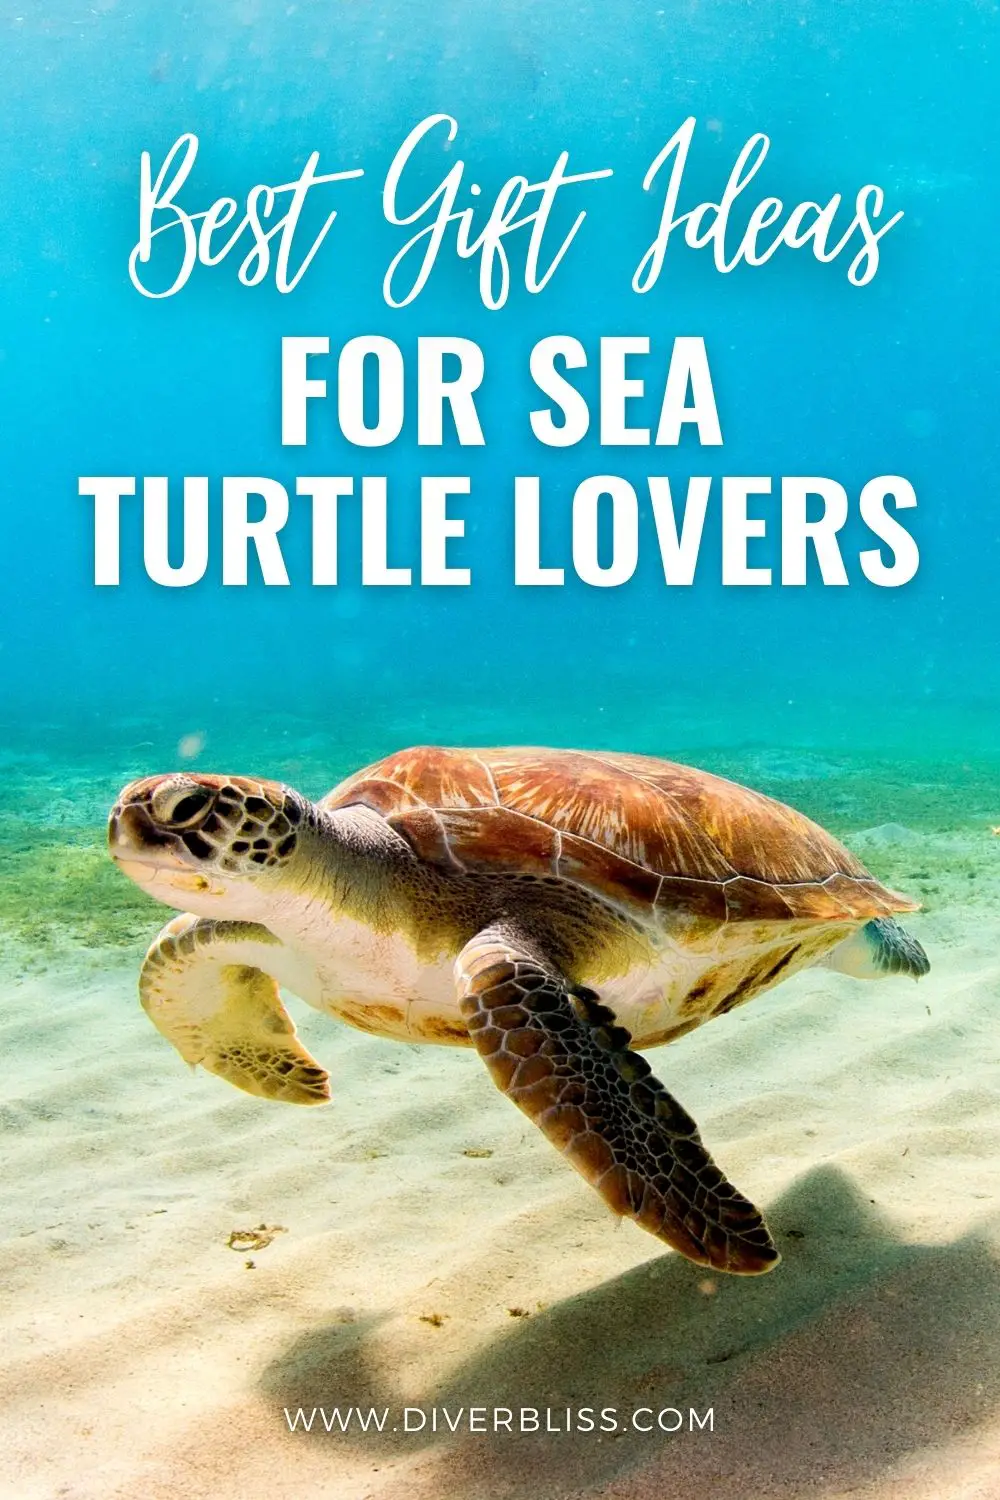 Best Gift Ideas for Sea Turtle Lovers